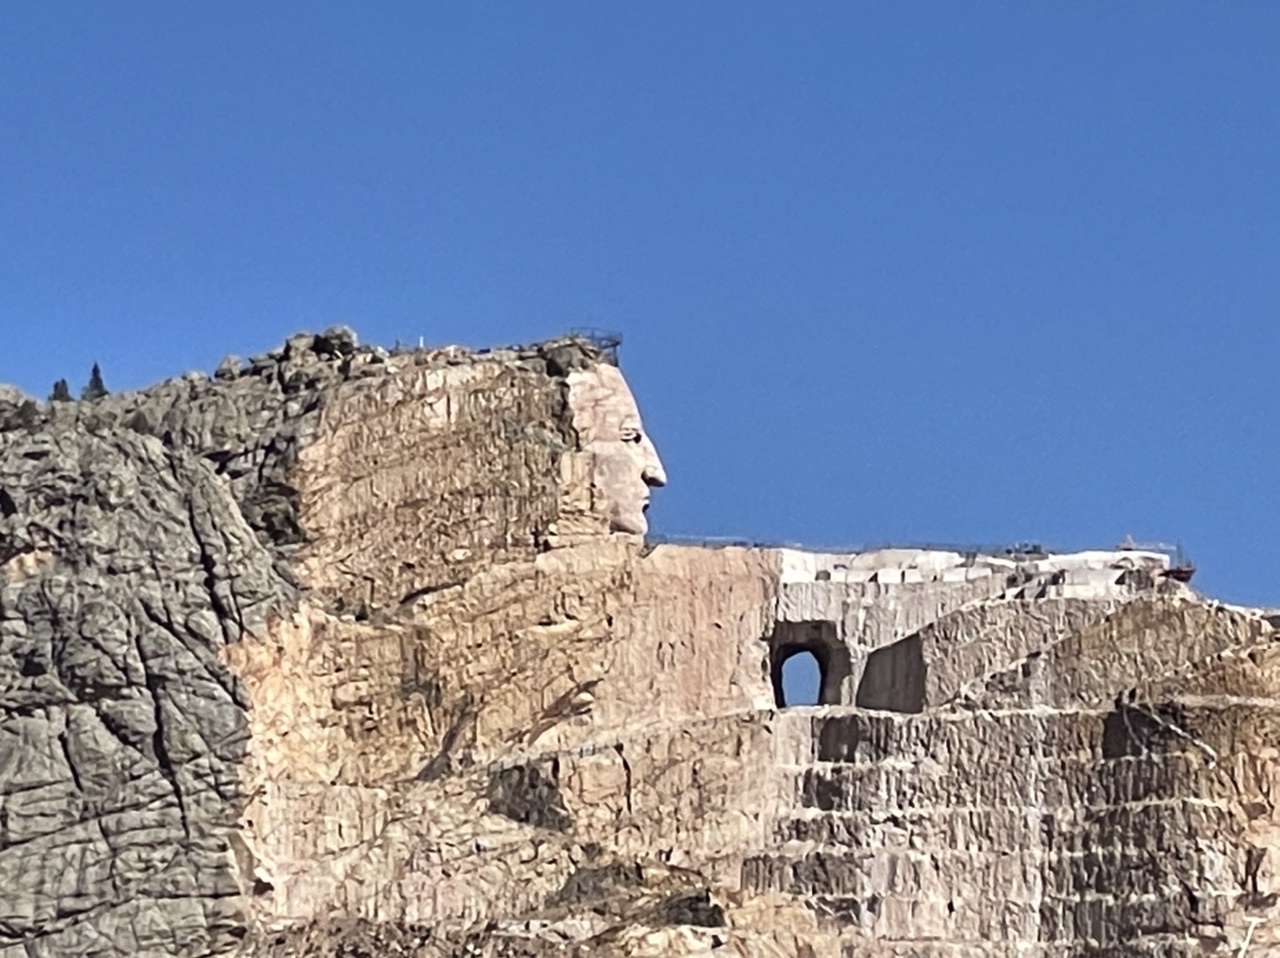 What the Crazy Horse memorial looks like after 73 years of work.  Photo taken by and the property of FourWalls.